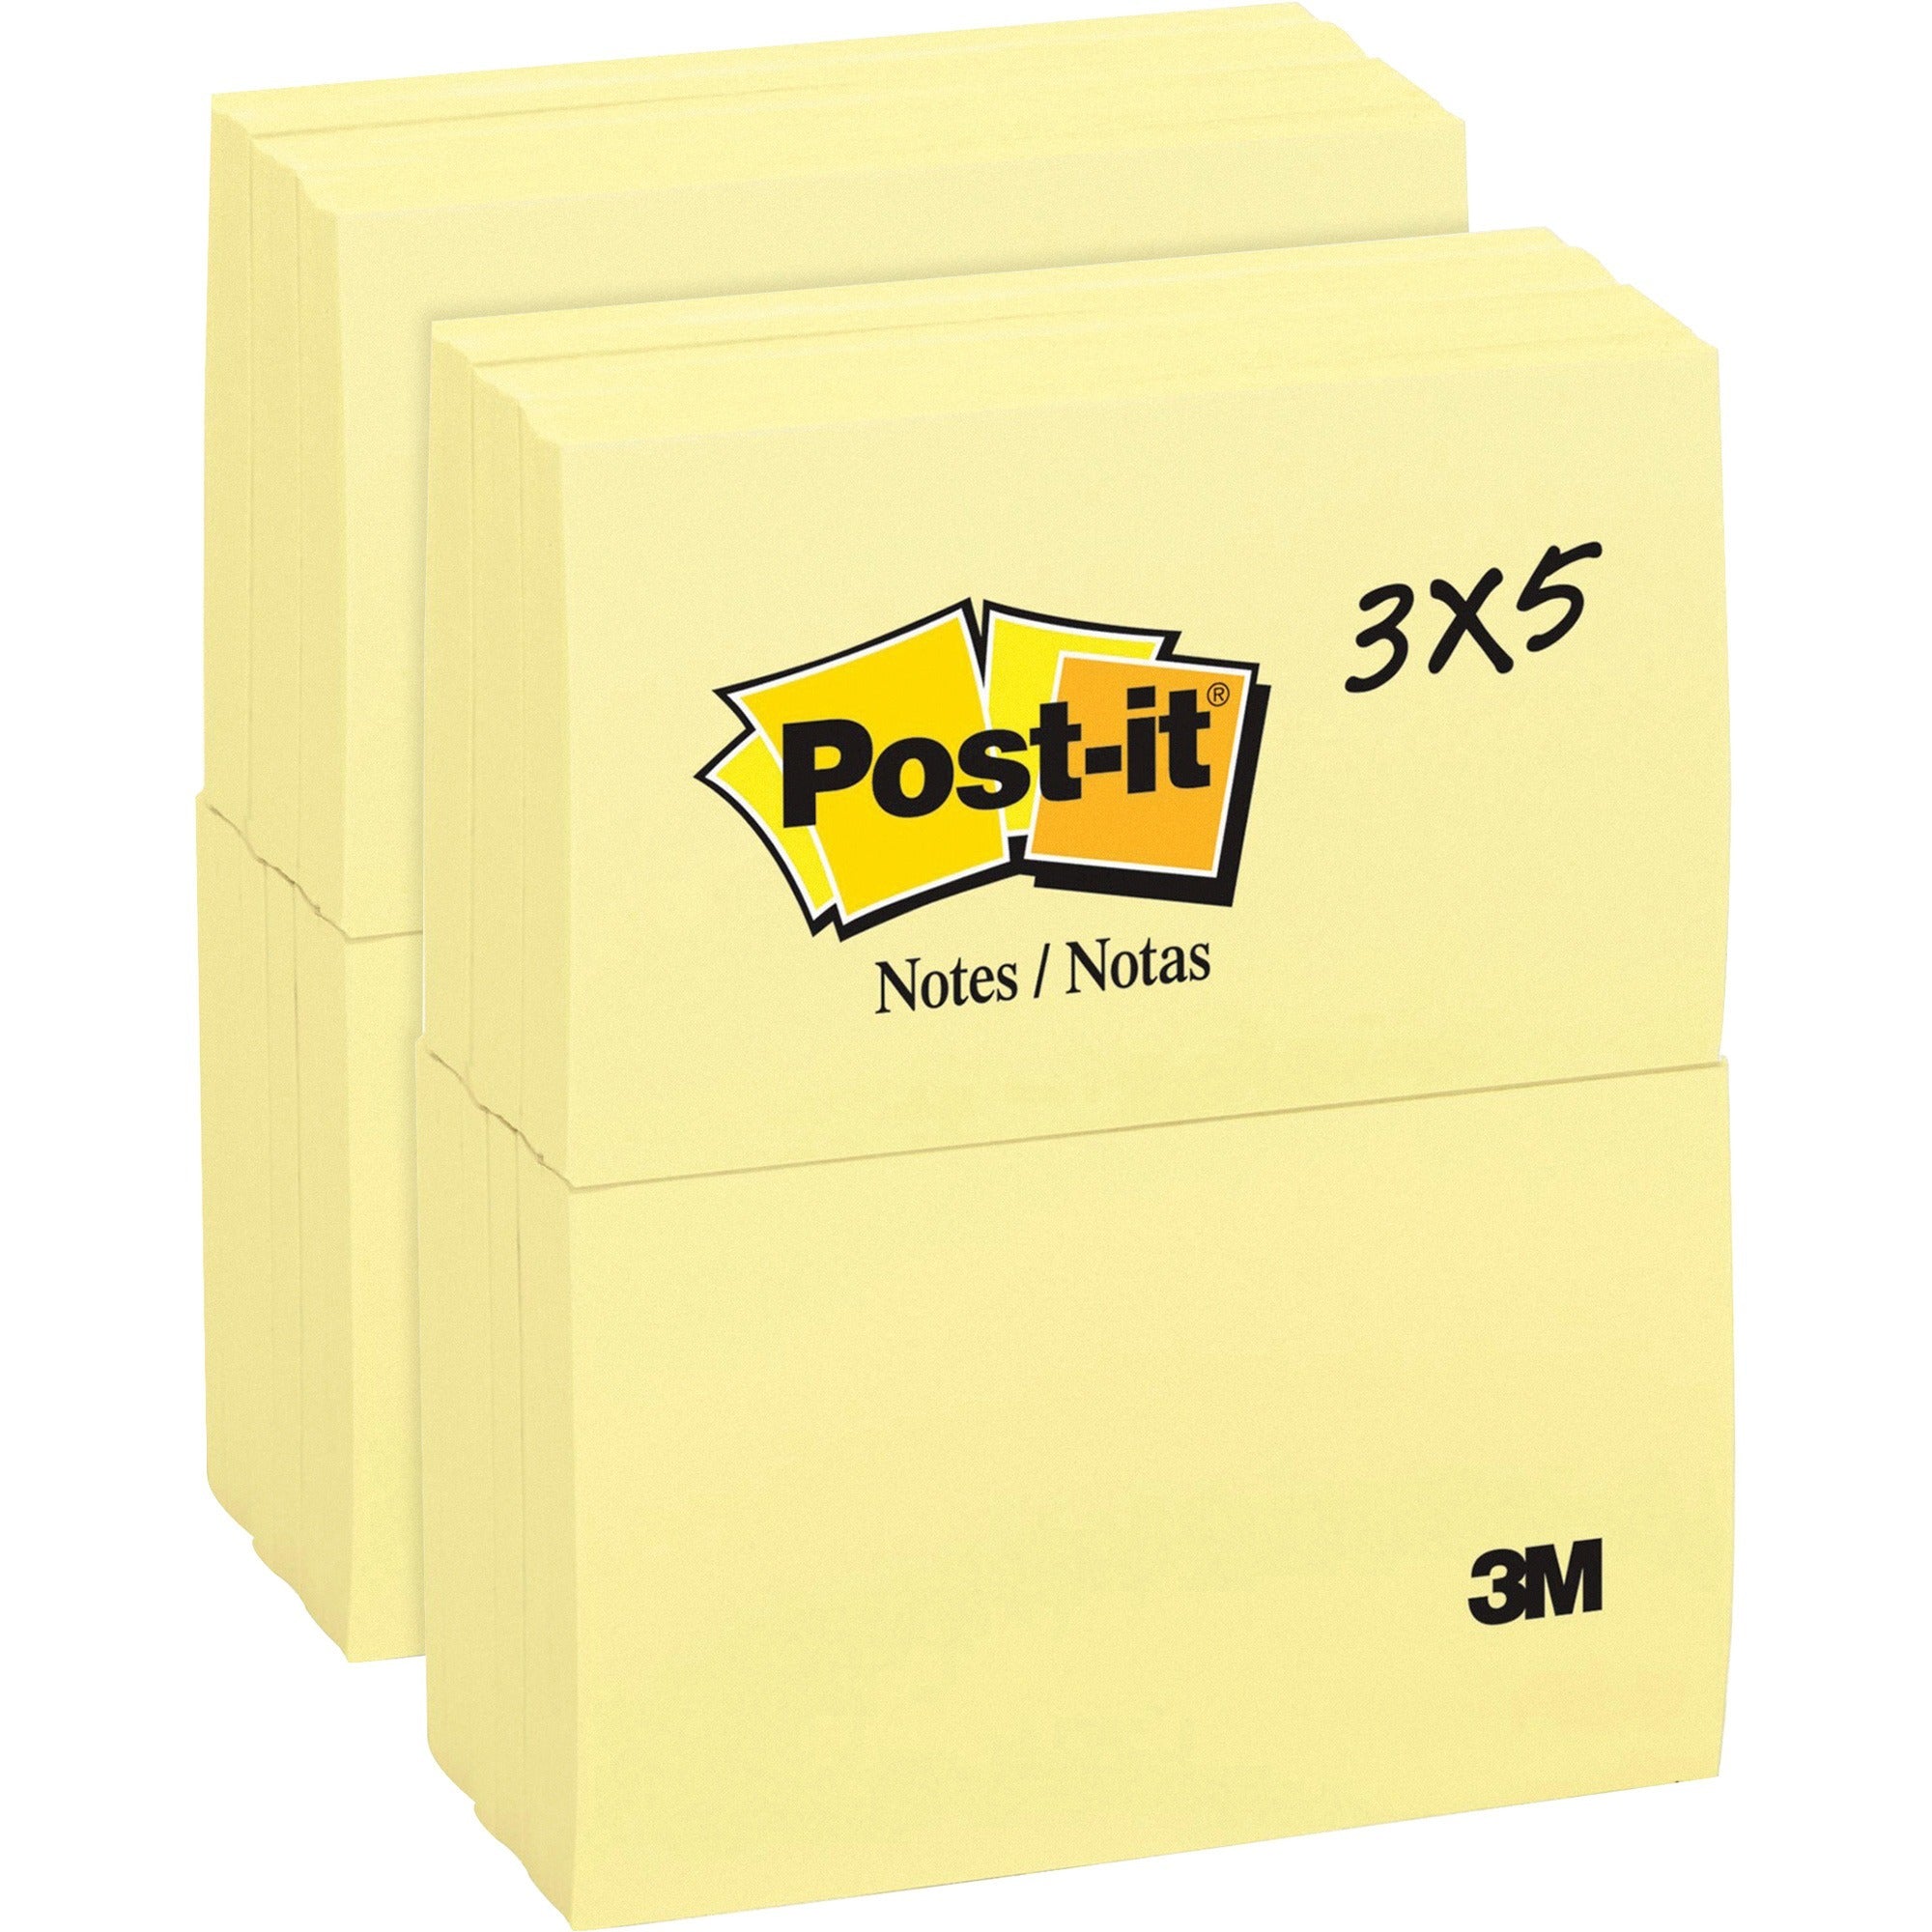 post-it-notes-original-notepads-3-x-5-rectangle-100-sheets-per-pad-unruled-canary-yellow-paper-self-adhesive-repositionable-24-bundle_mmm655ywbd - 1